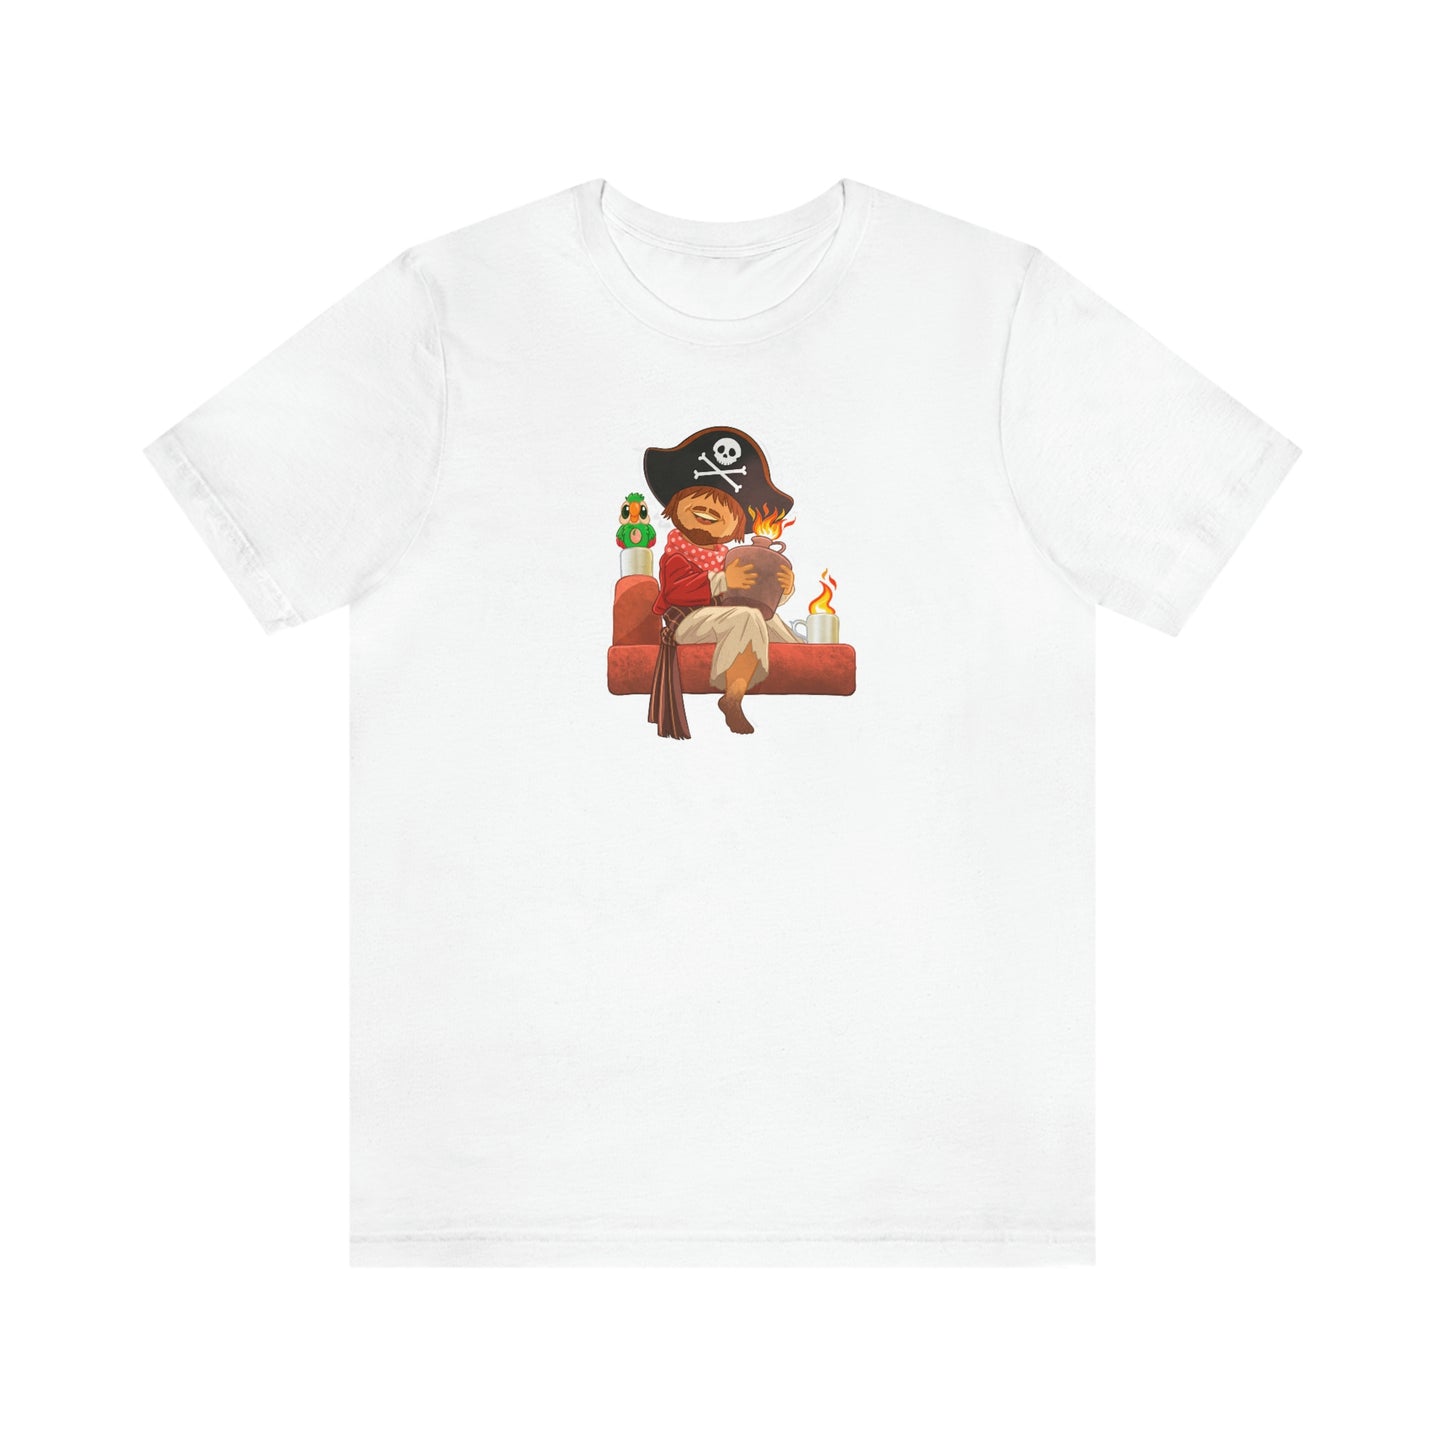 Dirty Foot Pirate Tee